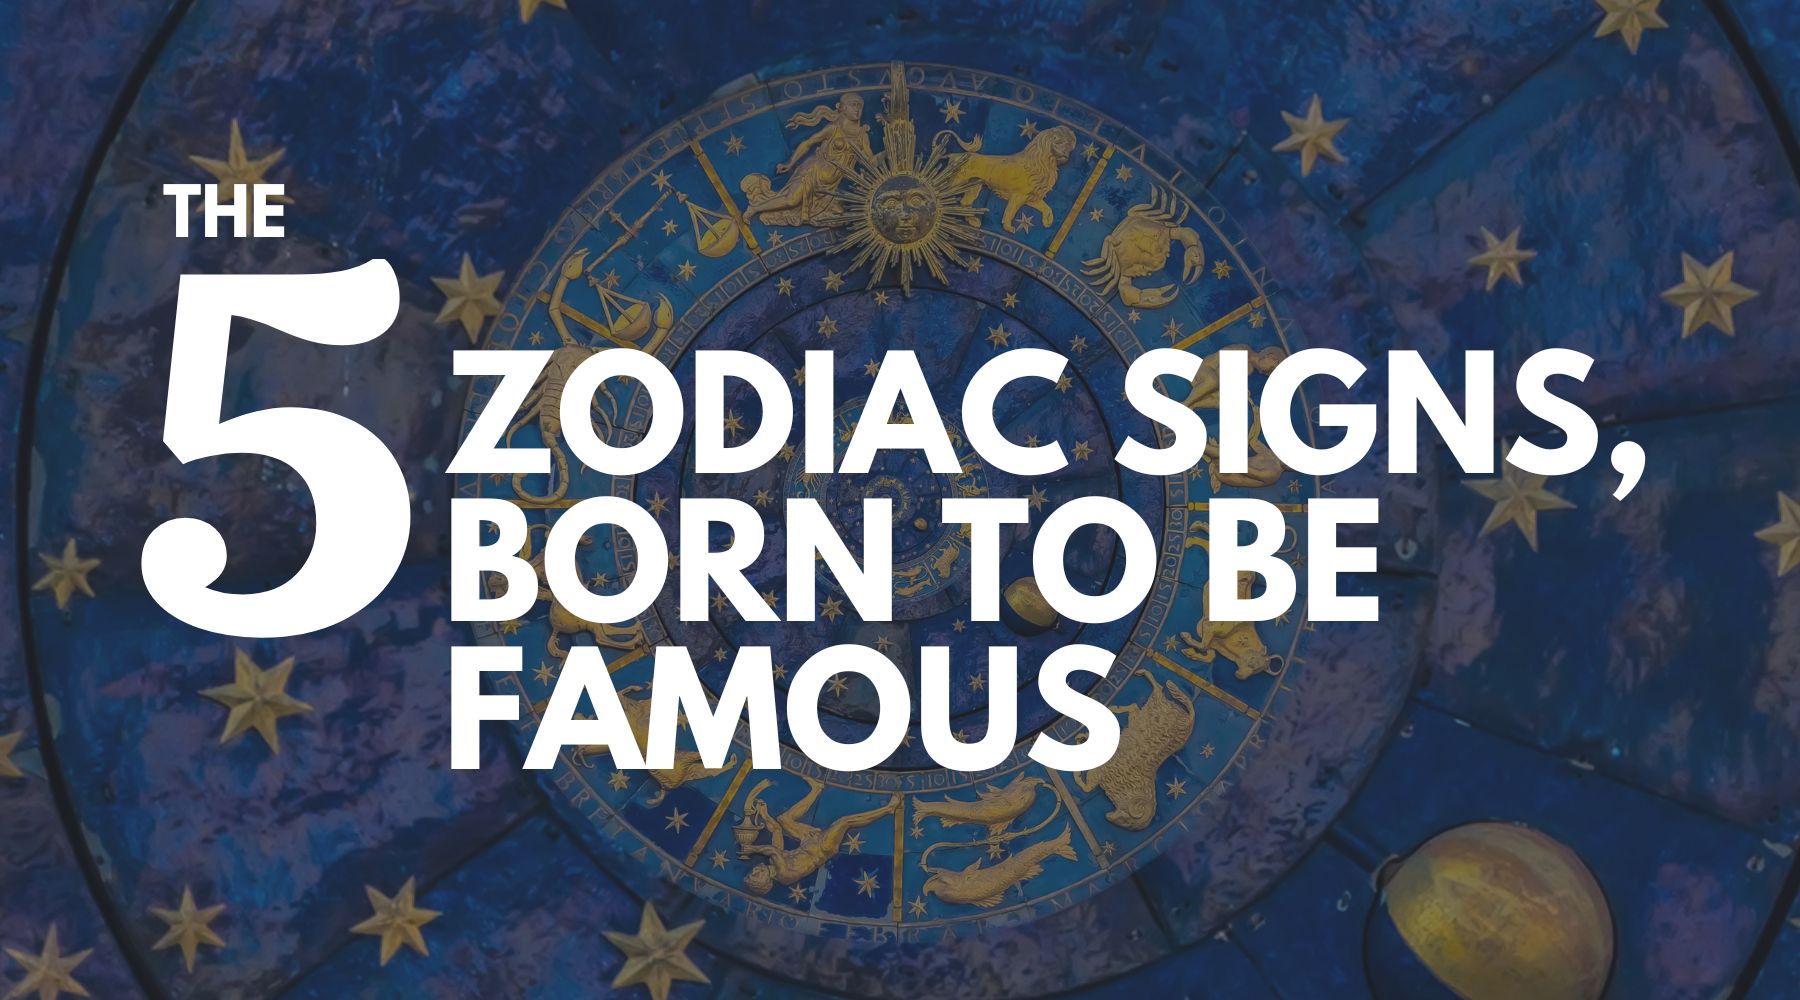 The 5 zodiac signs, born to be famous